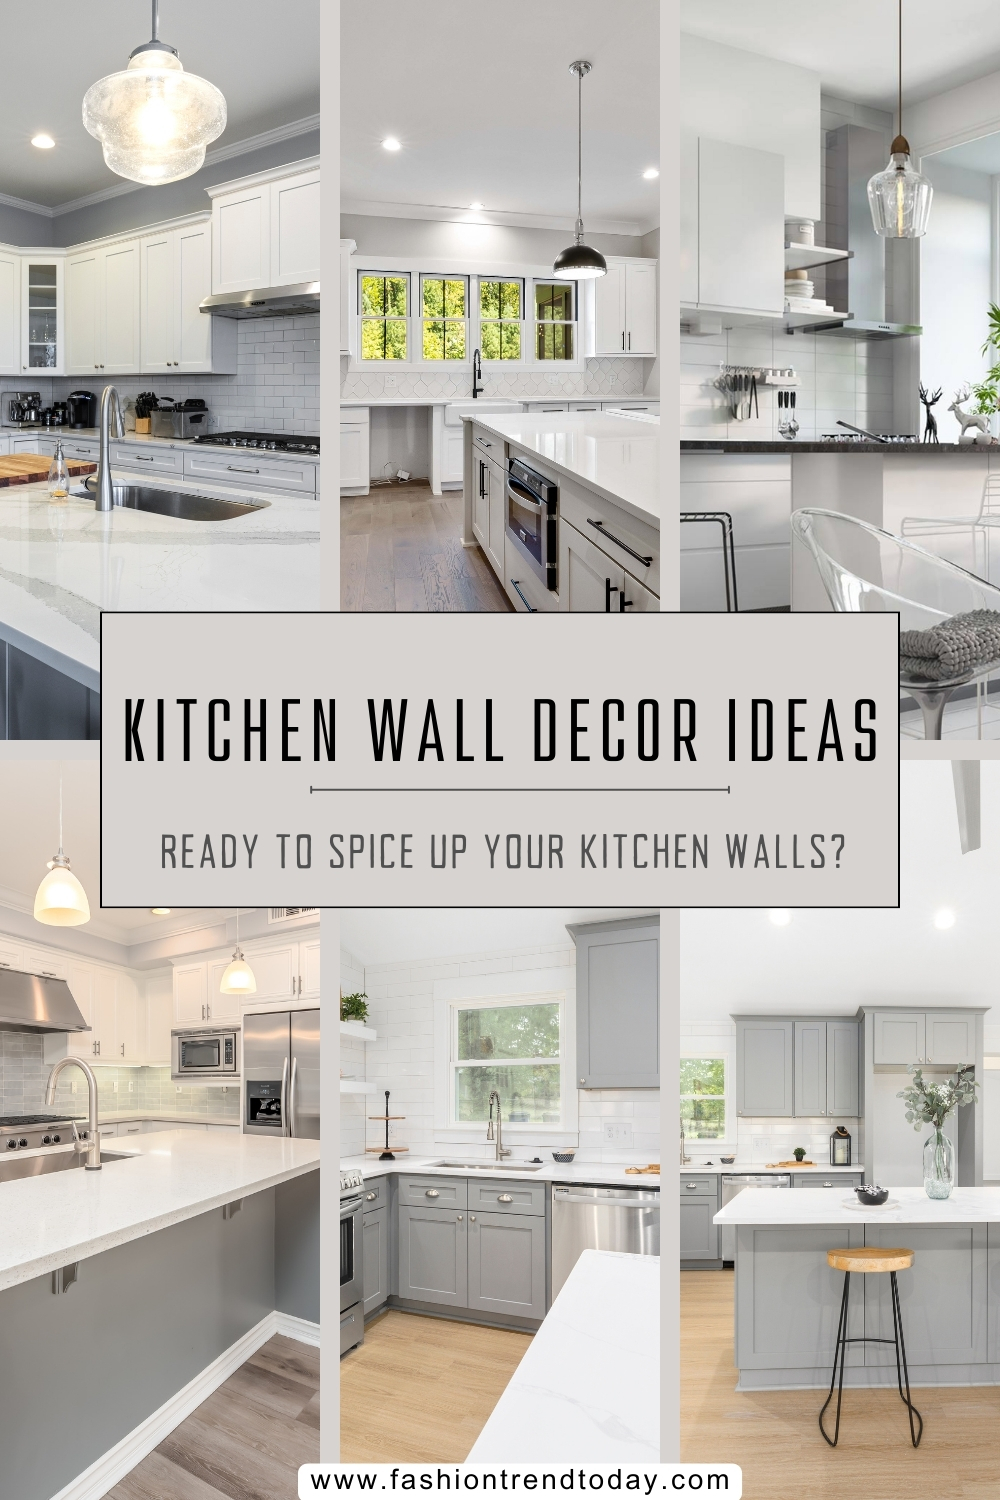 Ready to Spice Up Your Kitchen Walls?